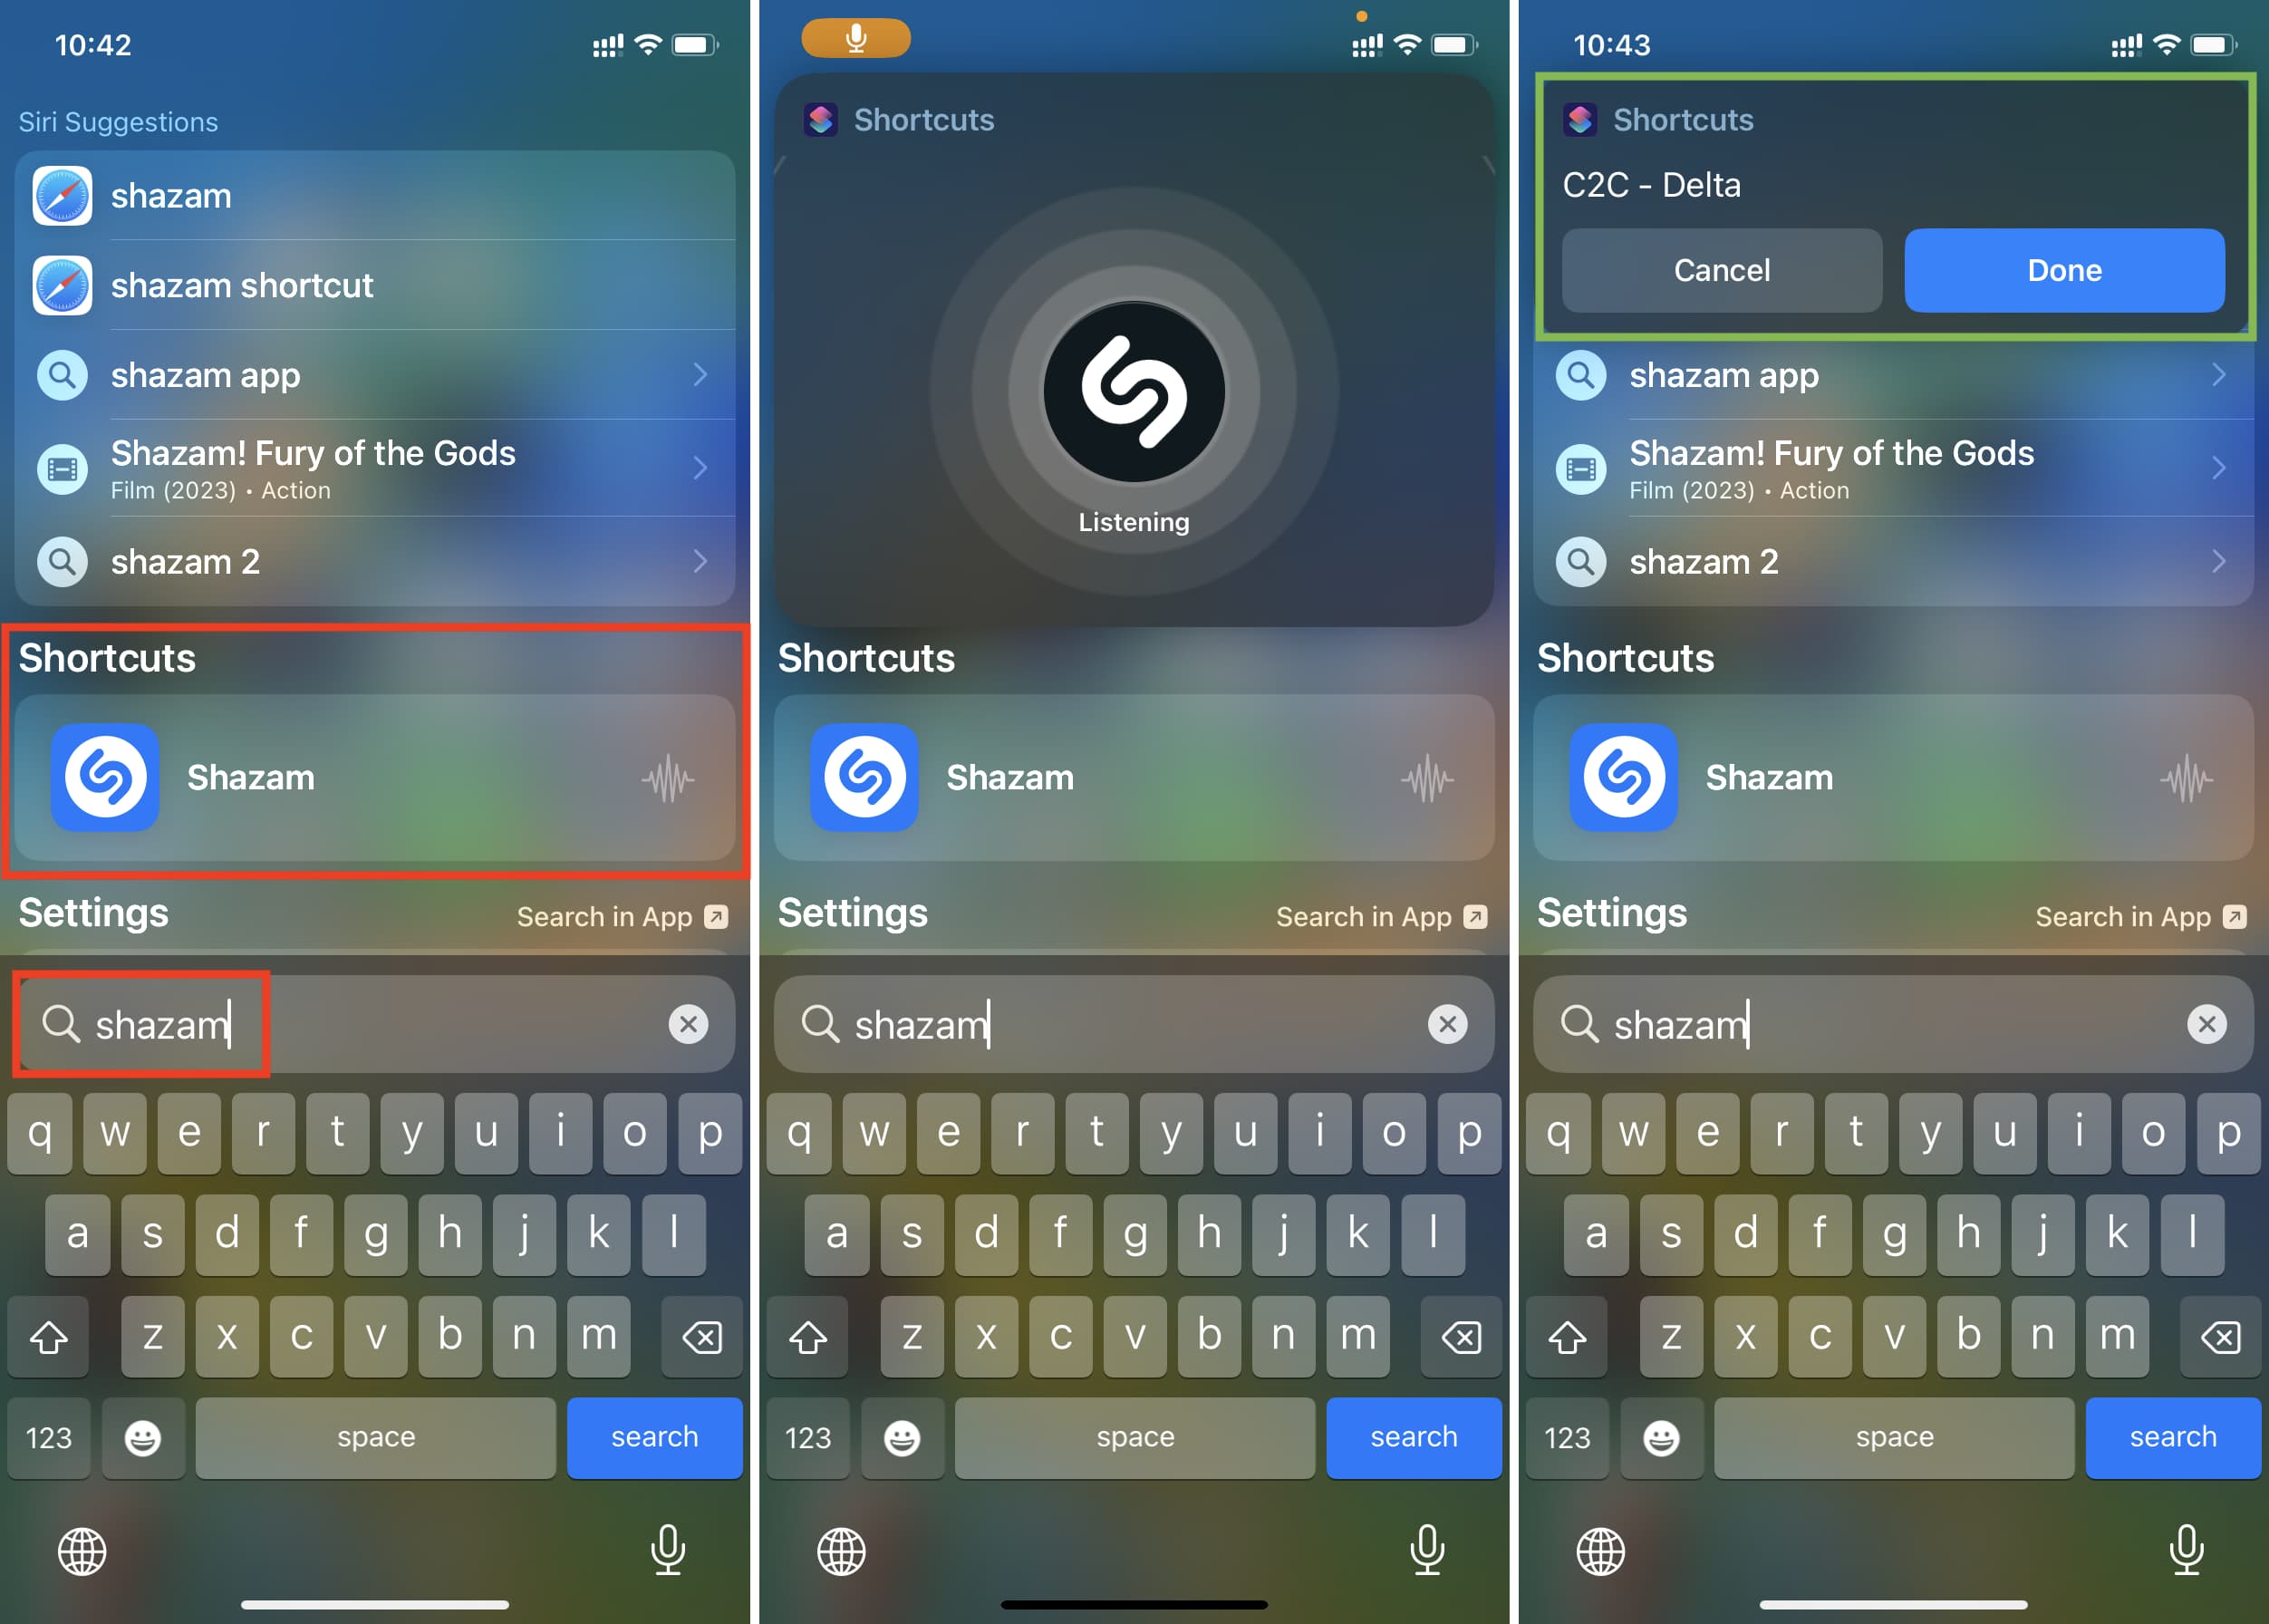 Use Shazam via Shortcut in iPhone Search